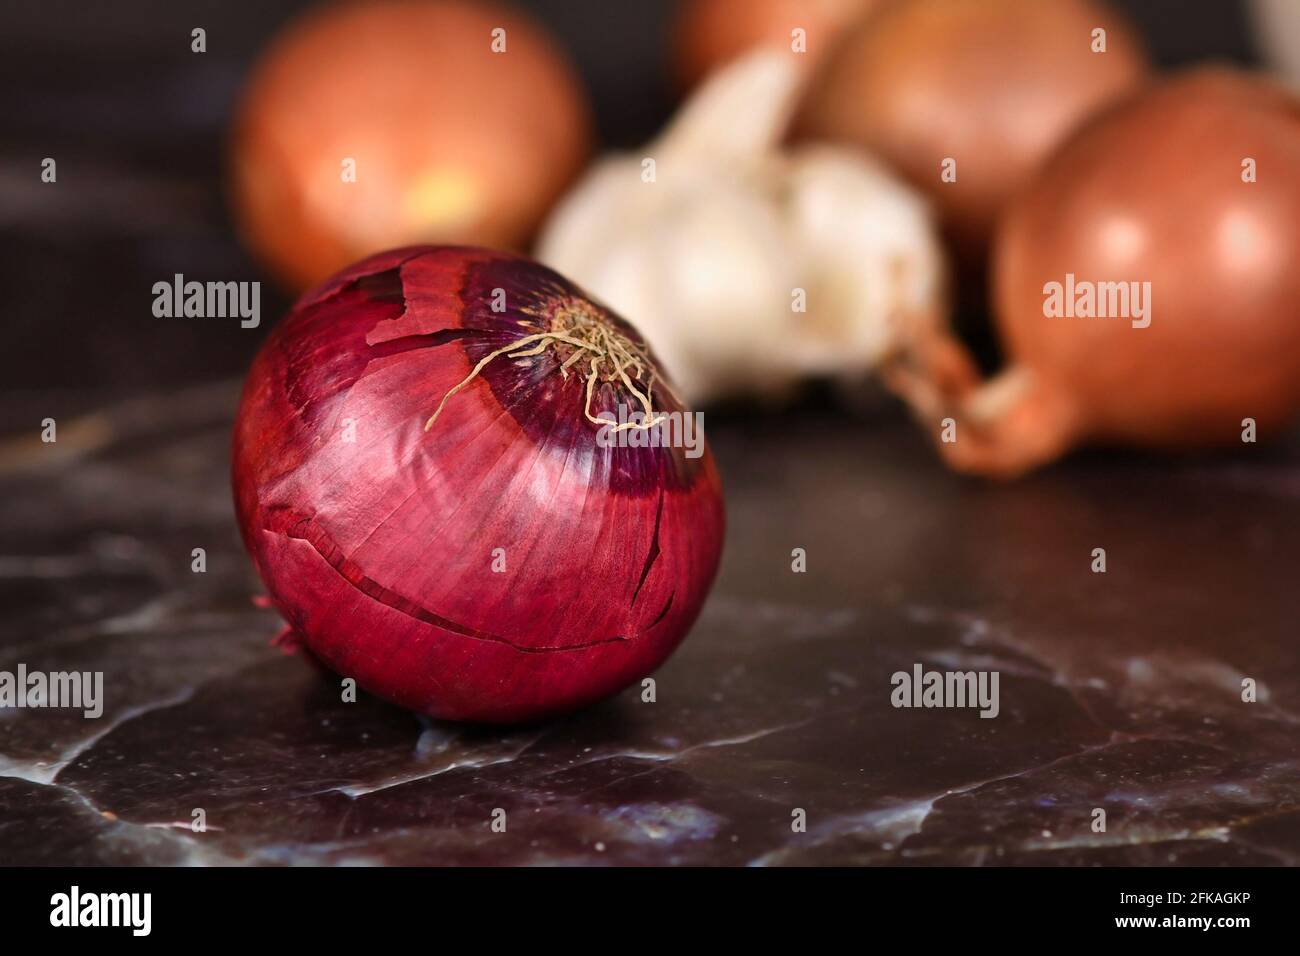 Whole 'Allium Cepa' red onion with purplish-red skin and root Stock Photo